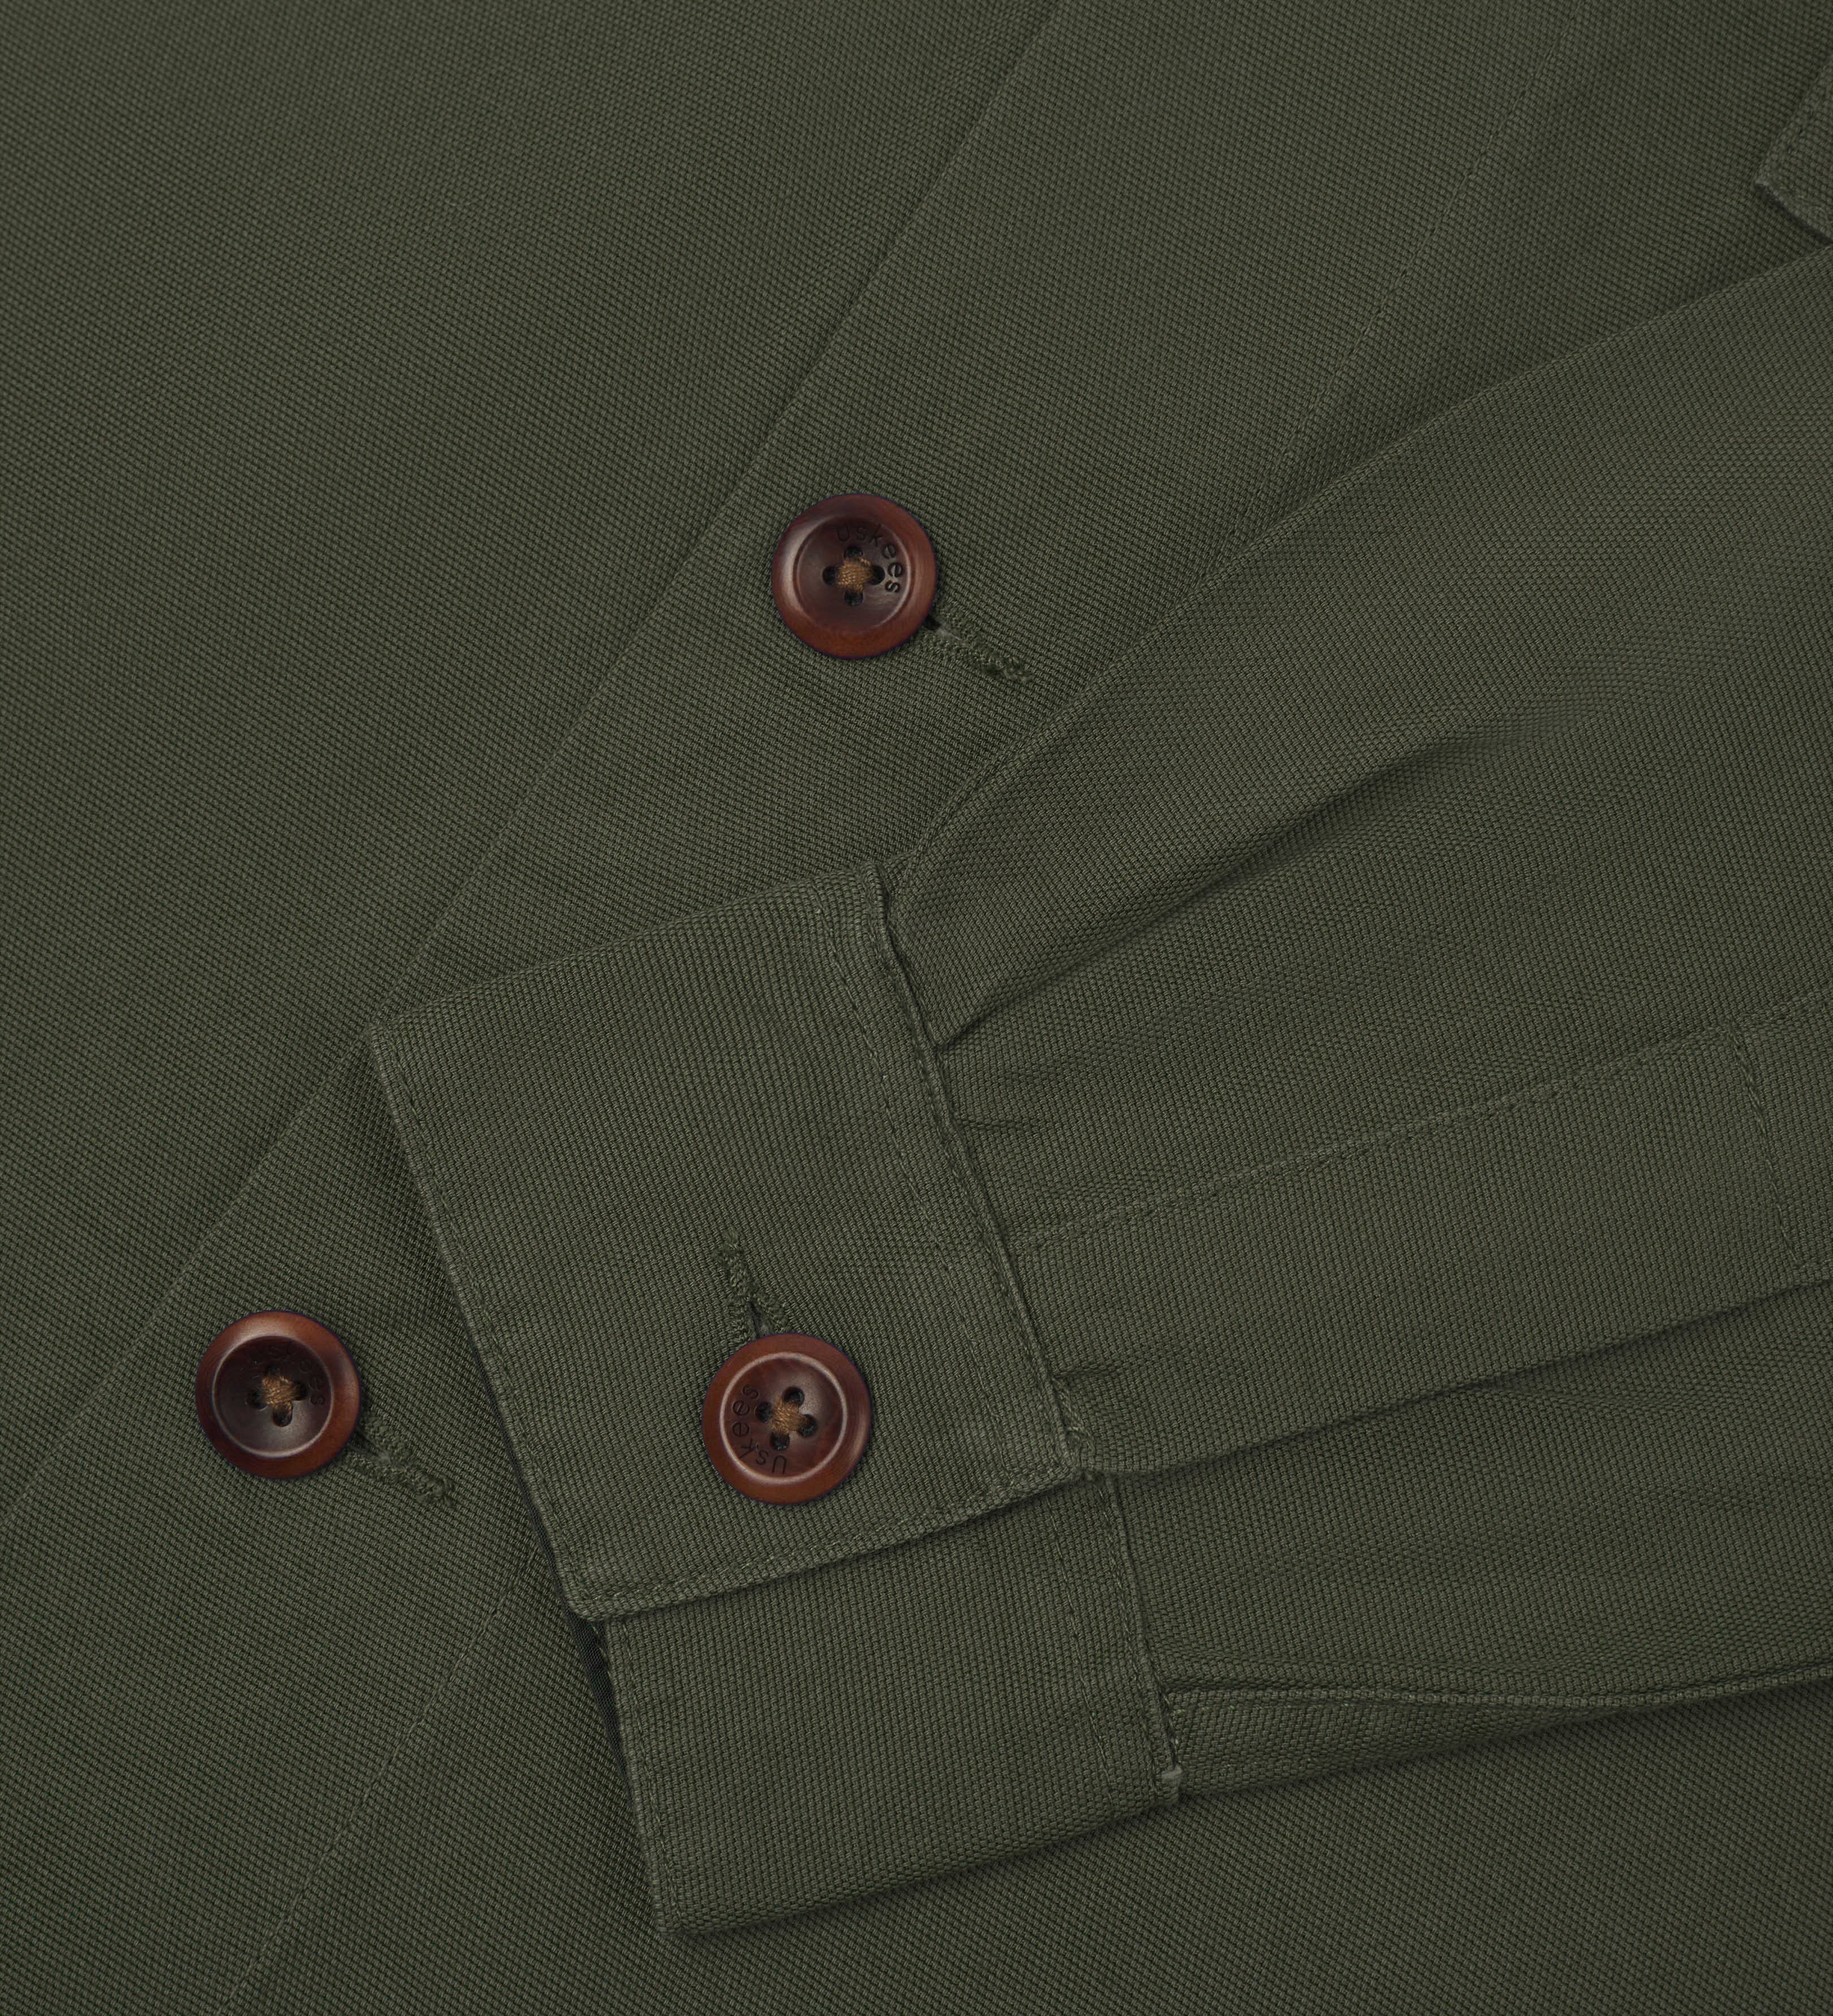 sleeve and corozo buttons.